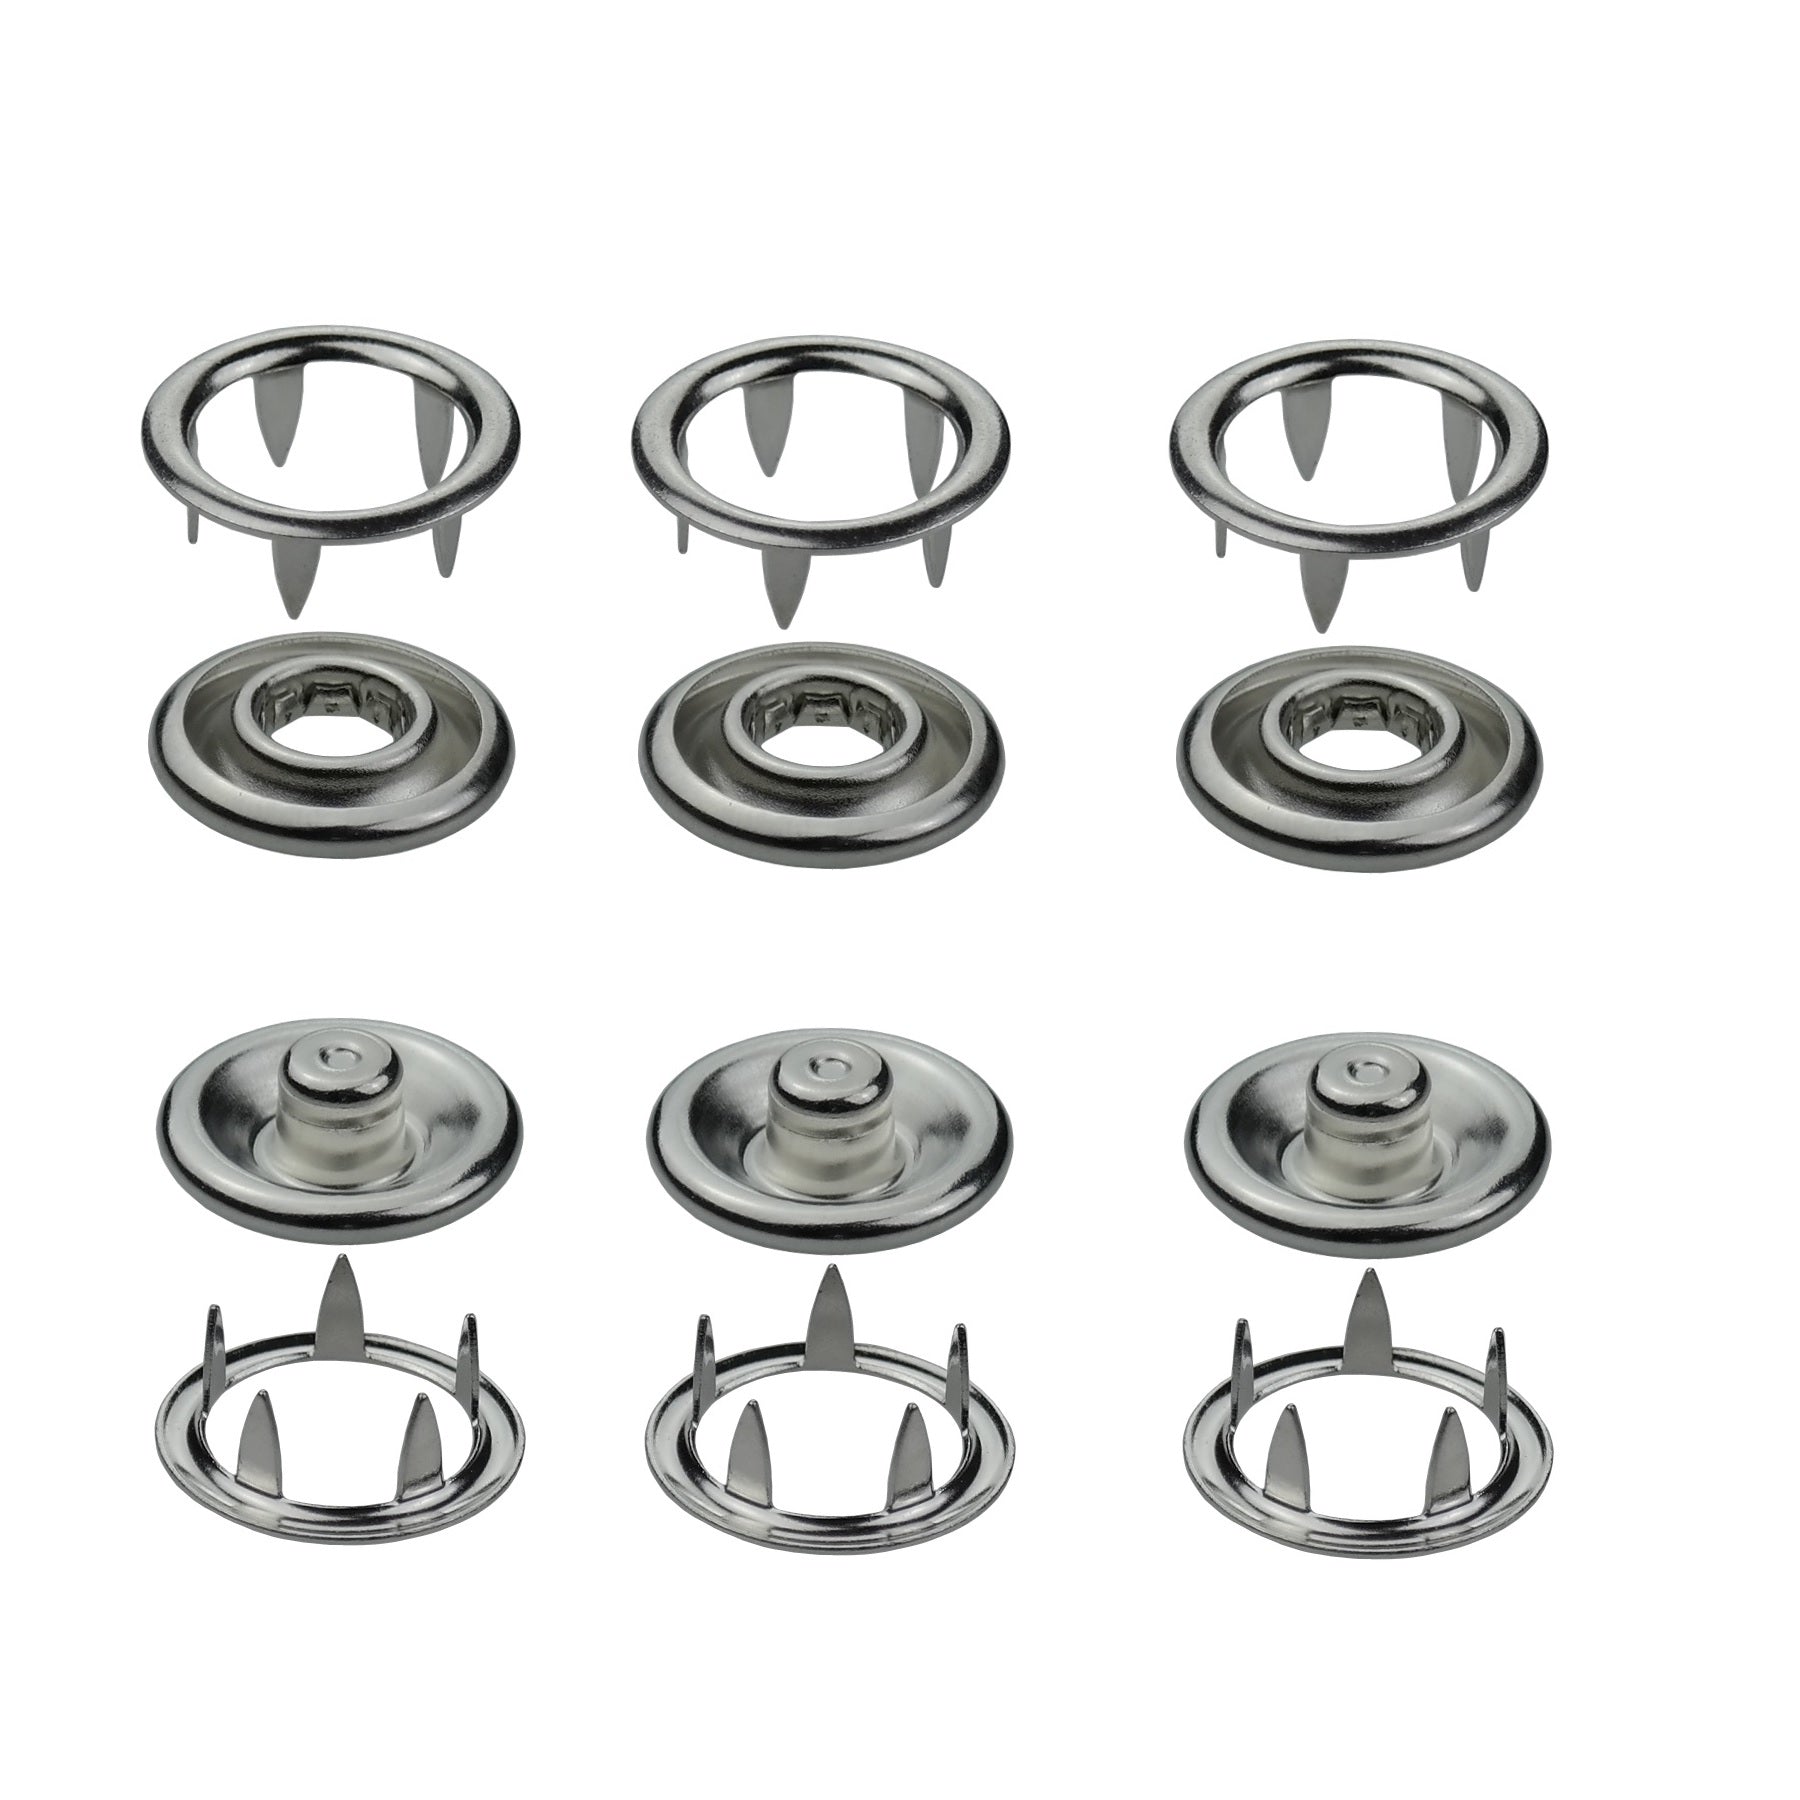 Snap fasteners jersey, rustproof metal buttons in 7 sizes